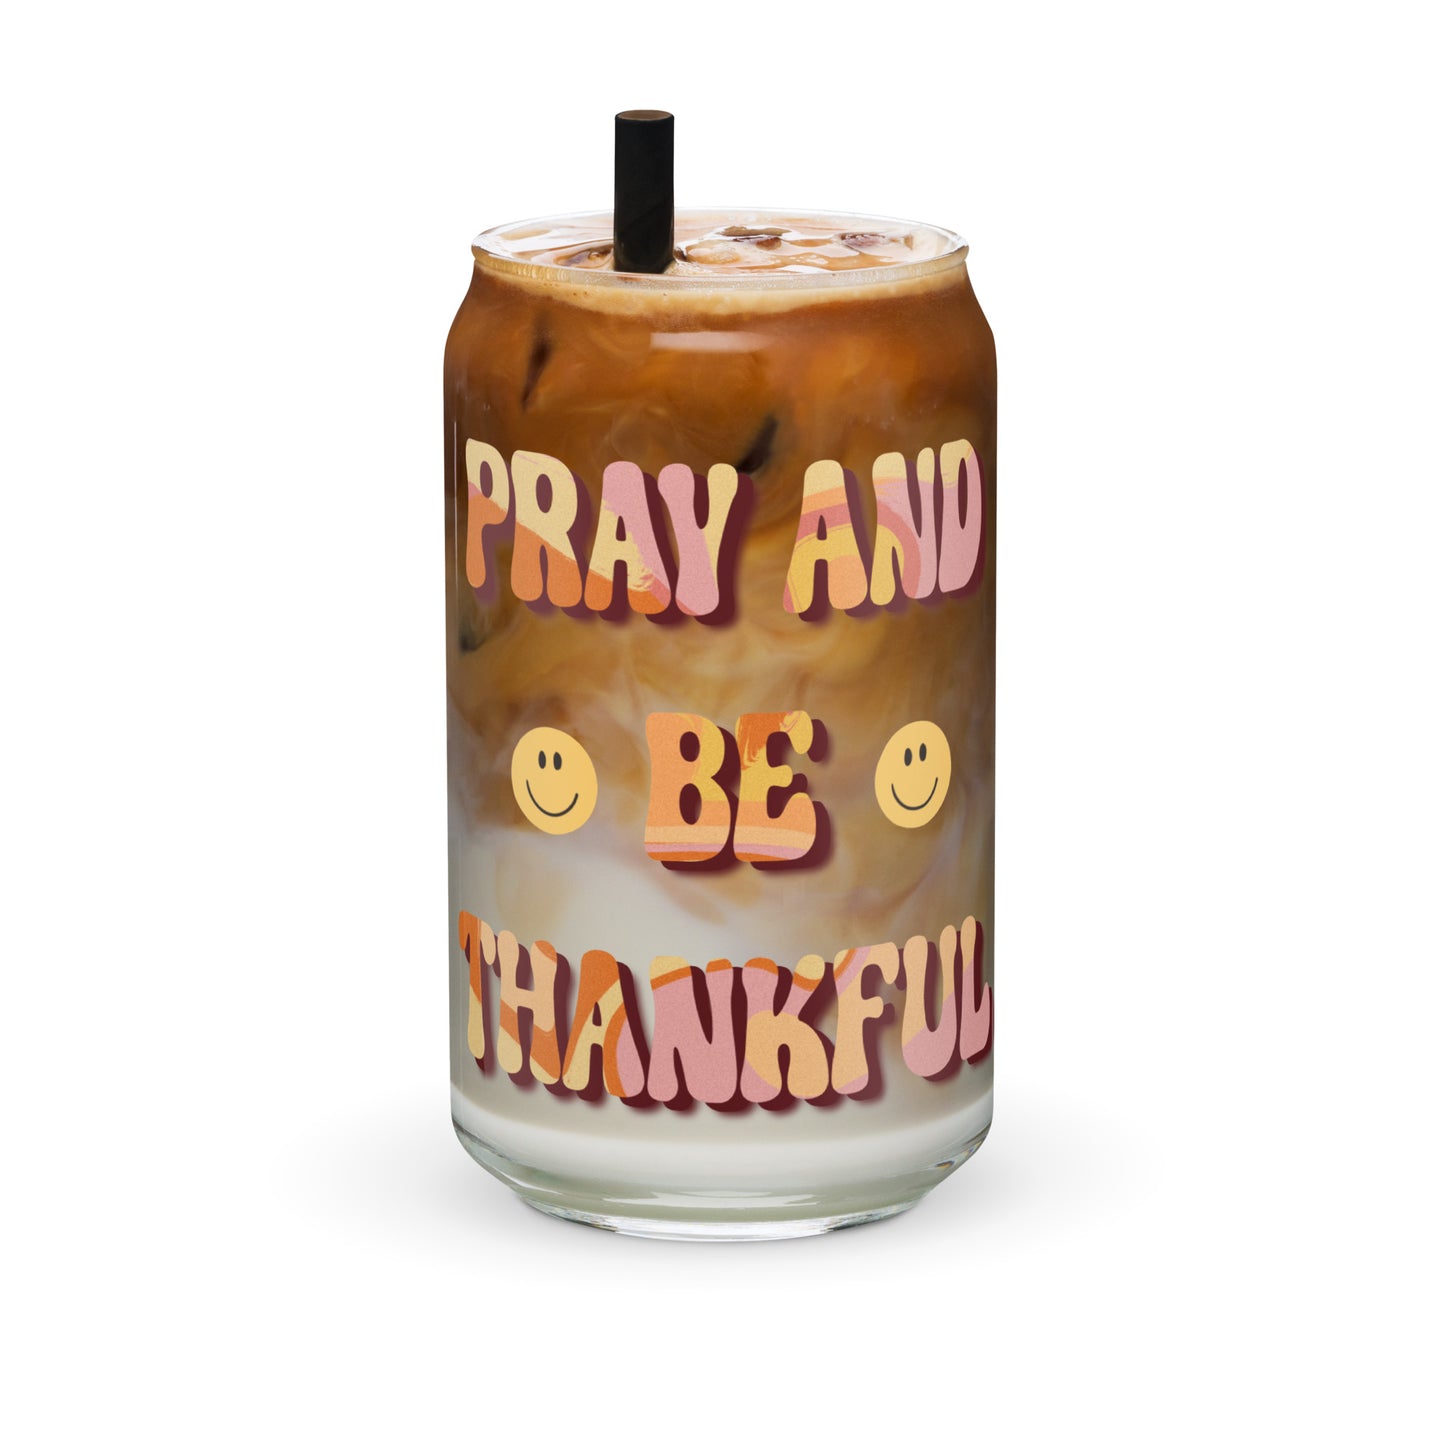 Pray and be thankful iced coffee beer can-shaped glass